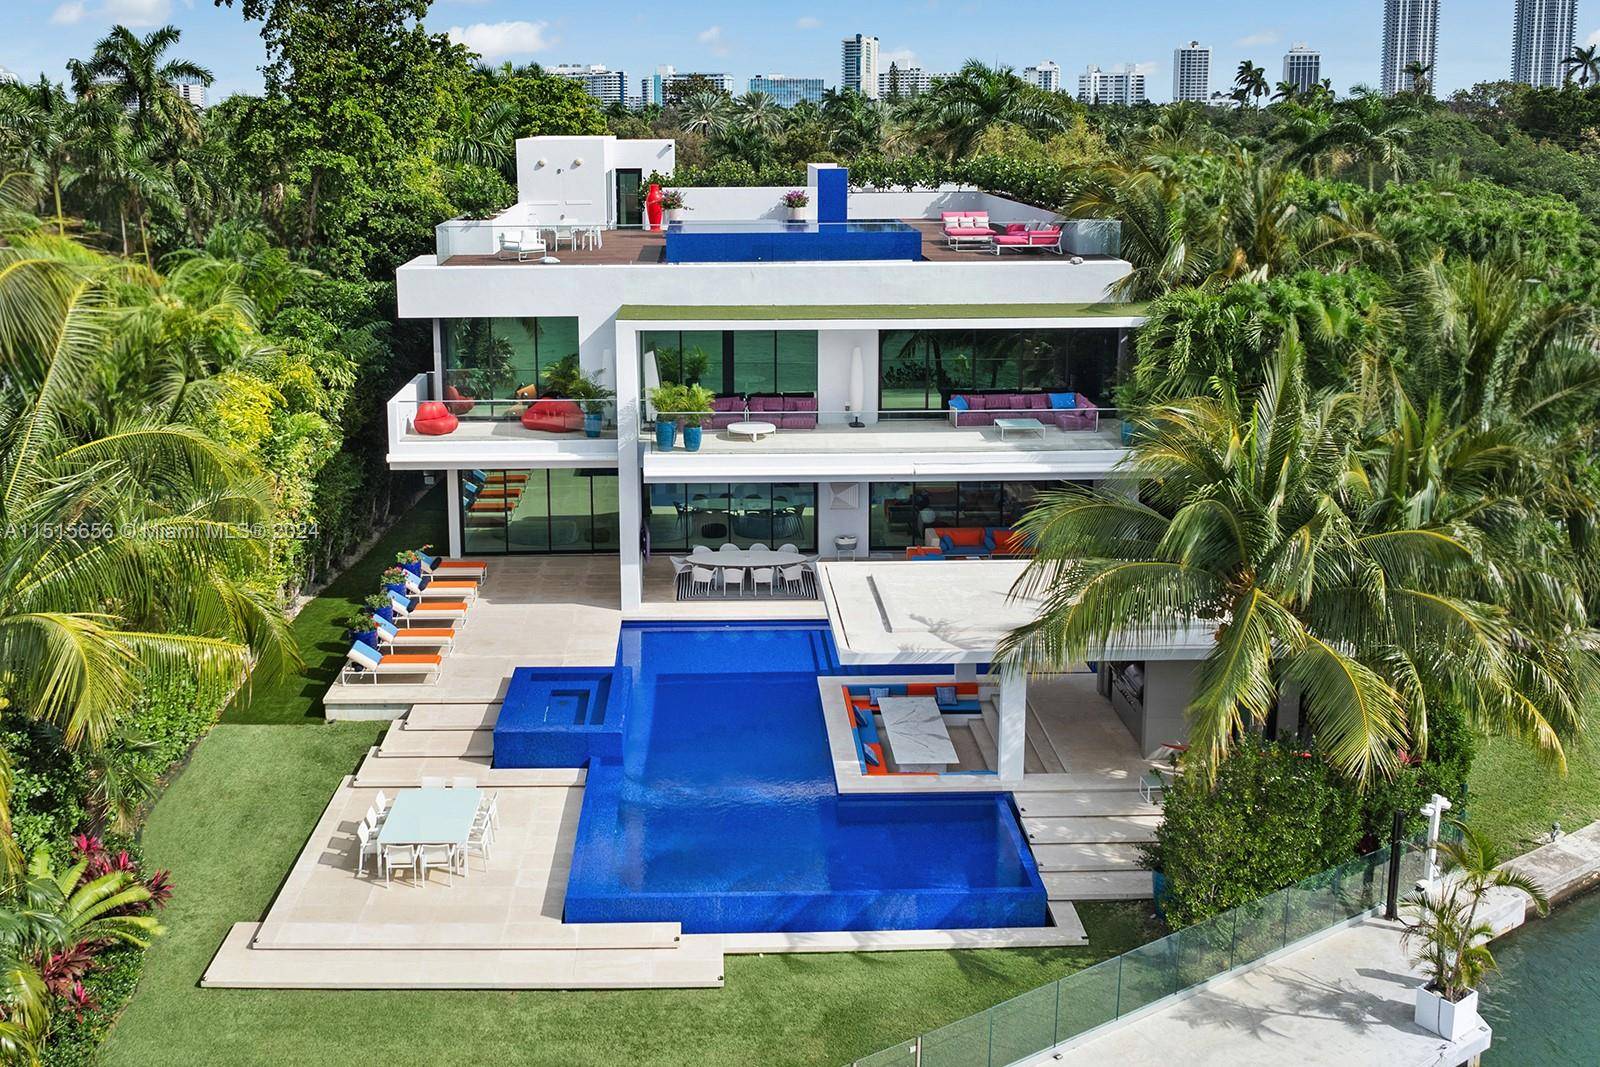 Situated on prestigious North Bay Road, this contemporary waterfront home epitomizes elegance and style.